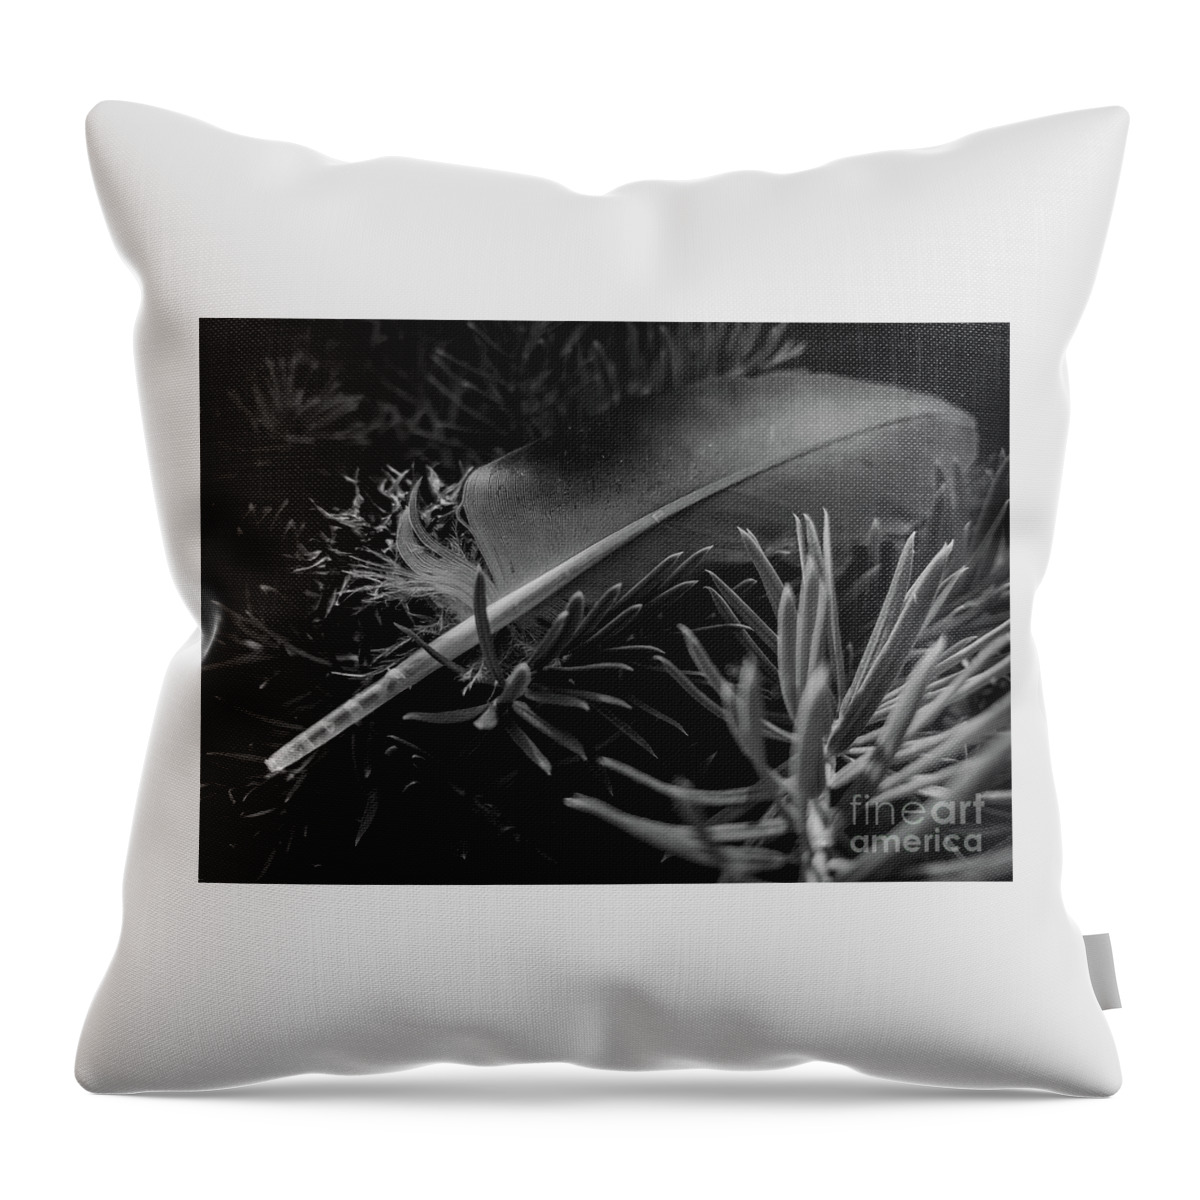 Feather Throw Pillow featuring the photograph Afeather by James Aiken